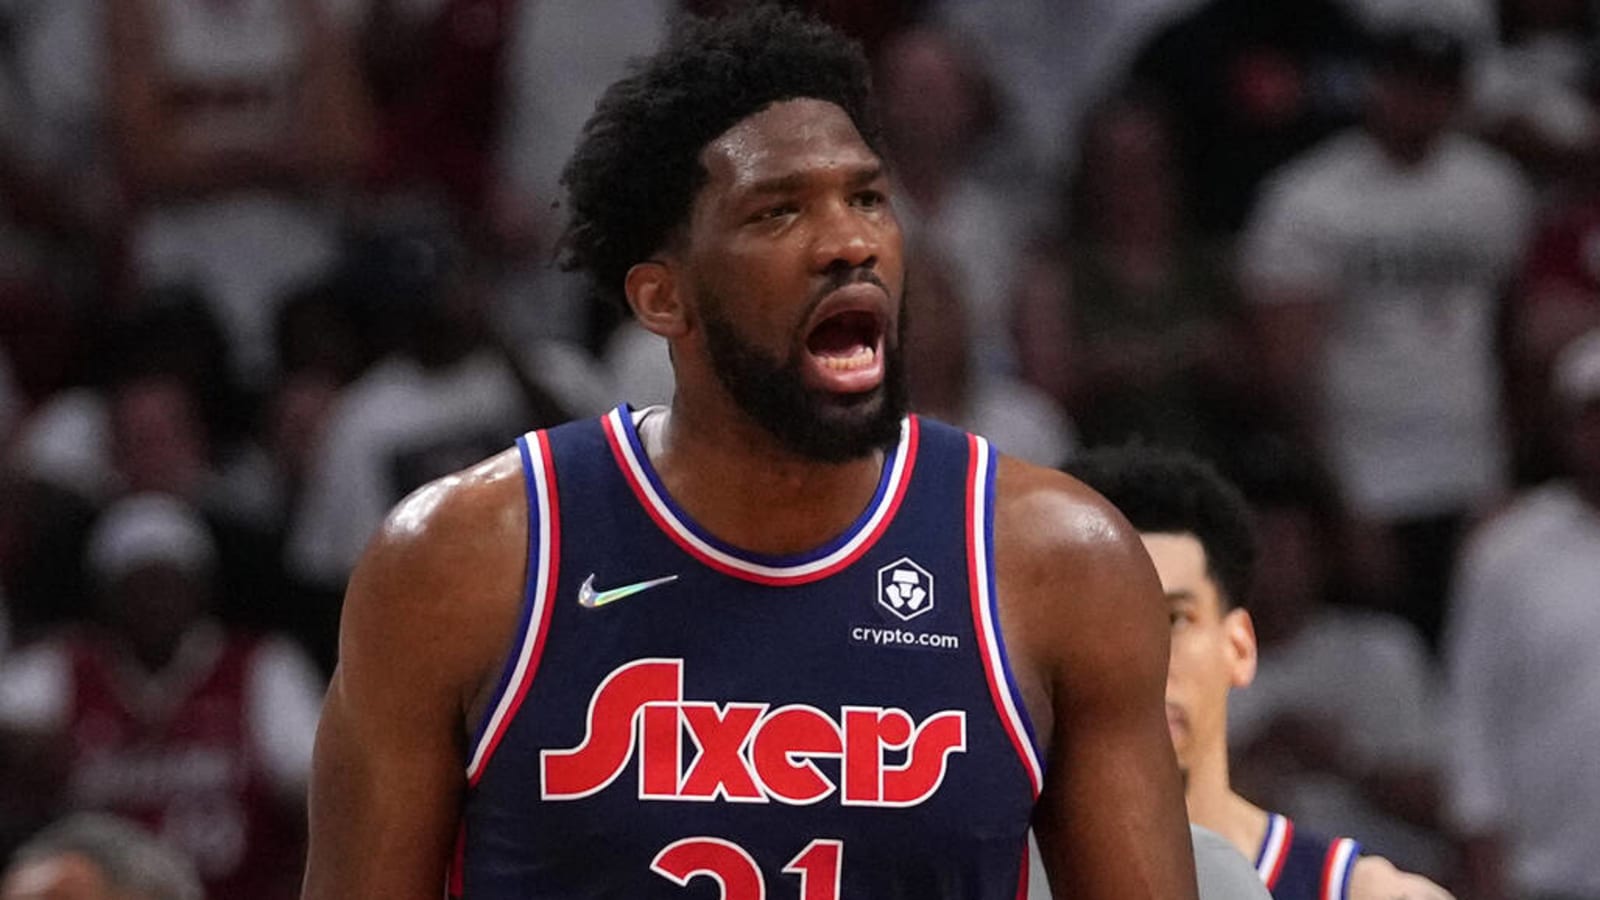 Watch: Sixers star Joel Embiid hit in the face again